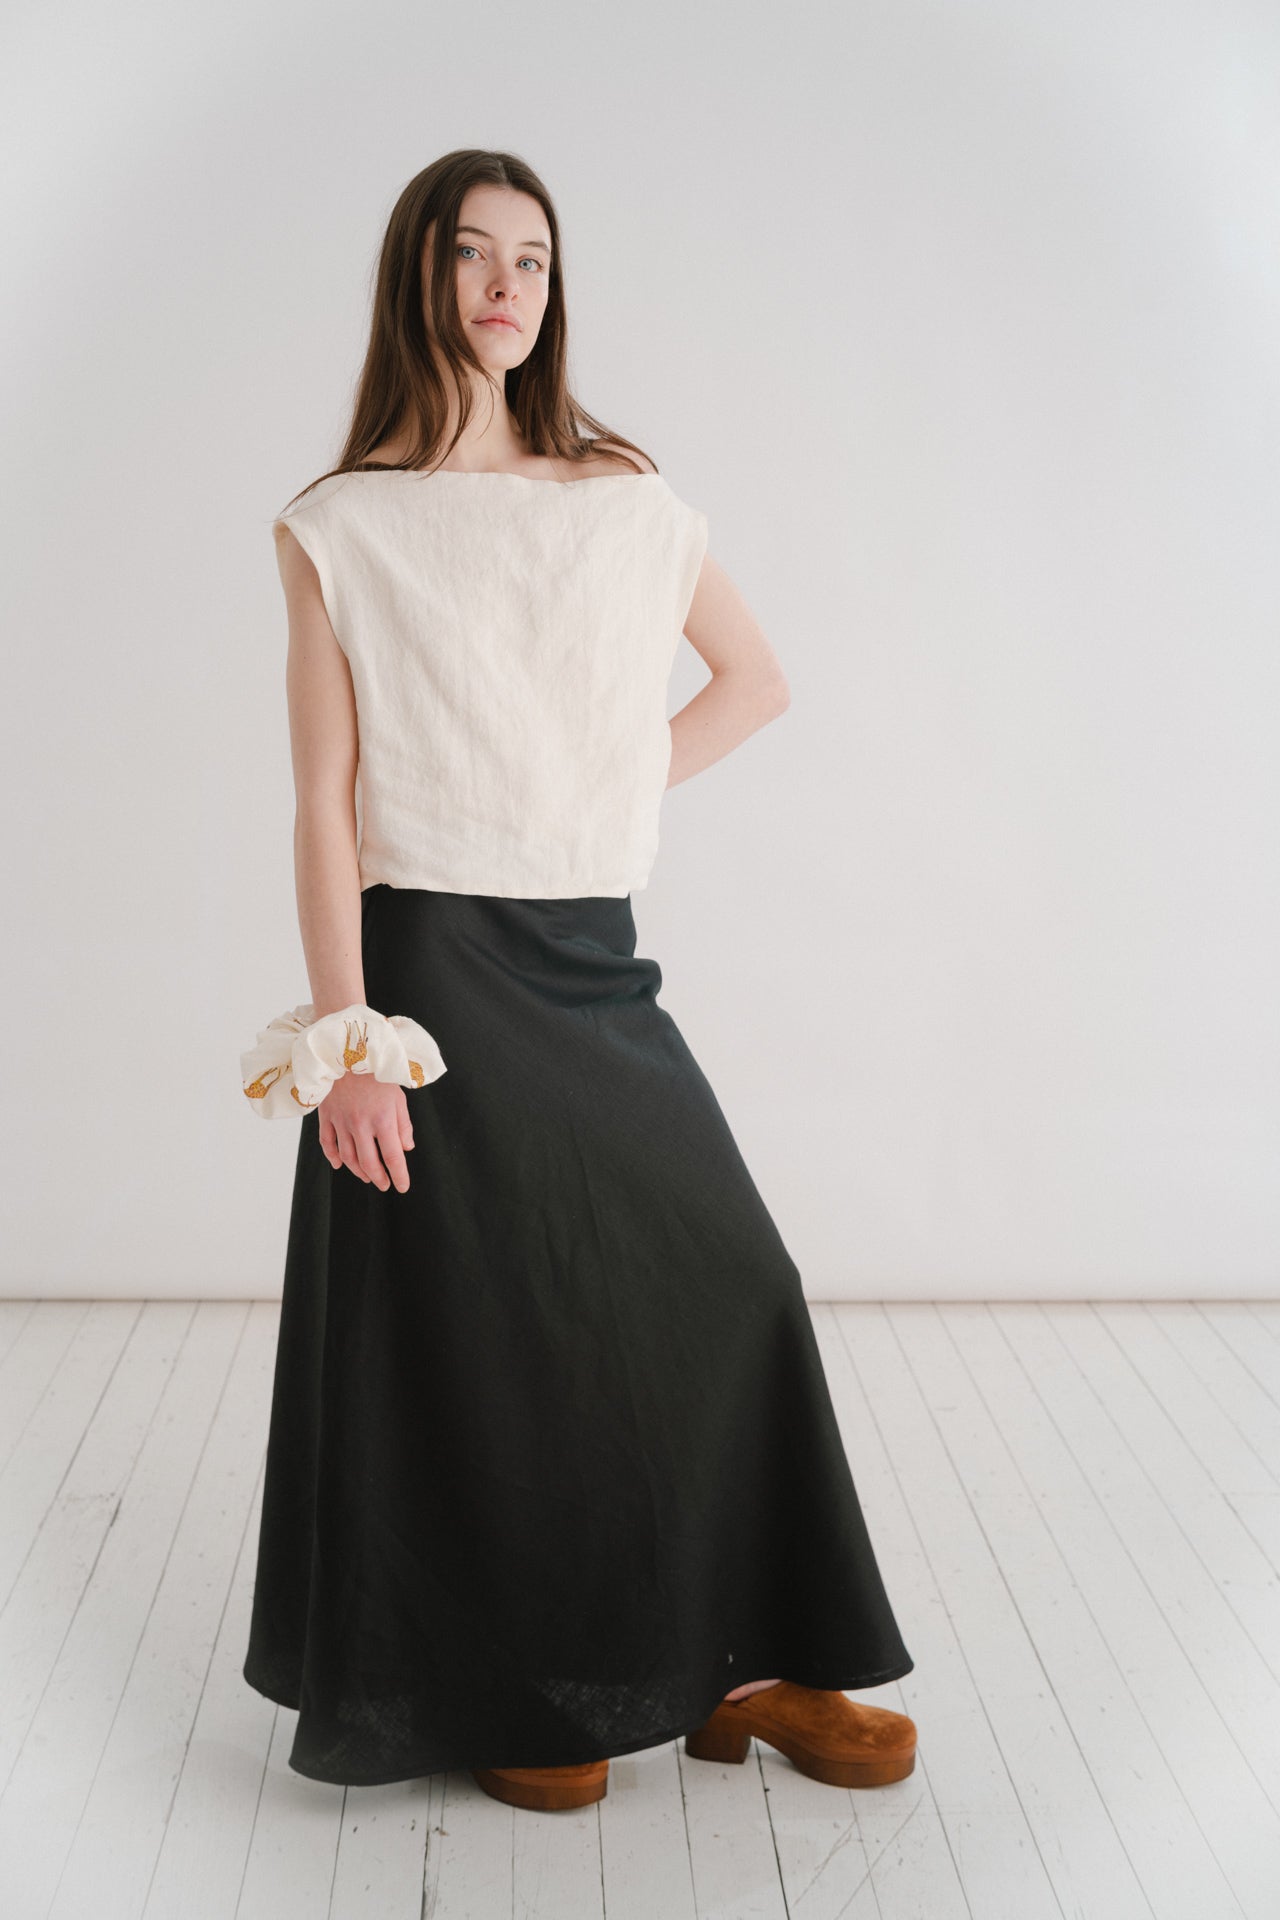 THE EVERYTHING SKIRT - BLACK | A new staple for SS24, the ‘everything’ skirt lives up to her name. An elegant bias cut makes this one feel really special to wear, whether you are pairing it with a simple tee, knit or our Evie top and heels for a more elev